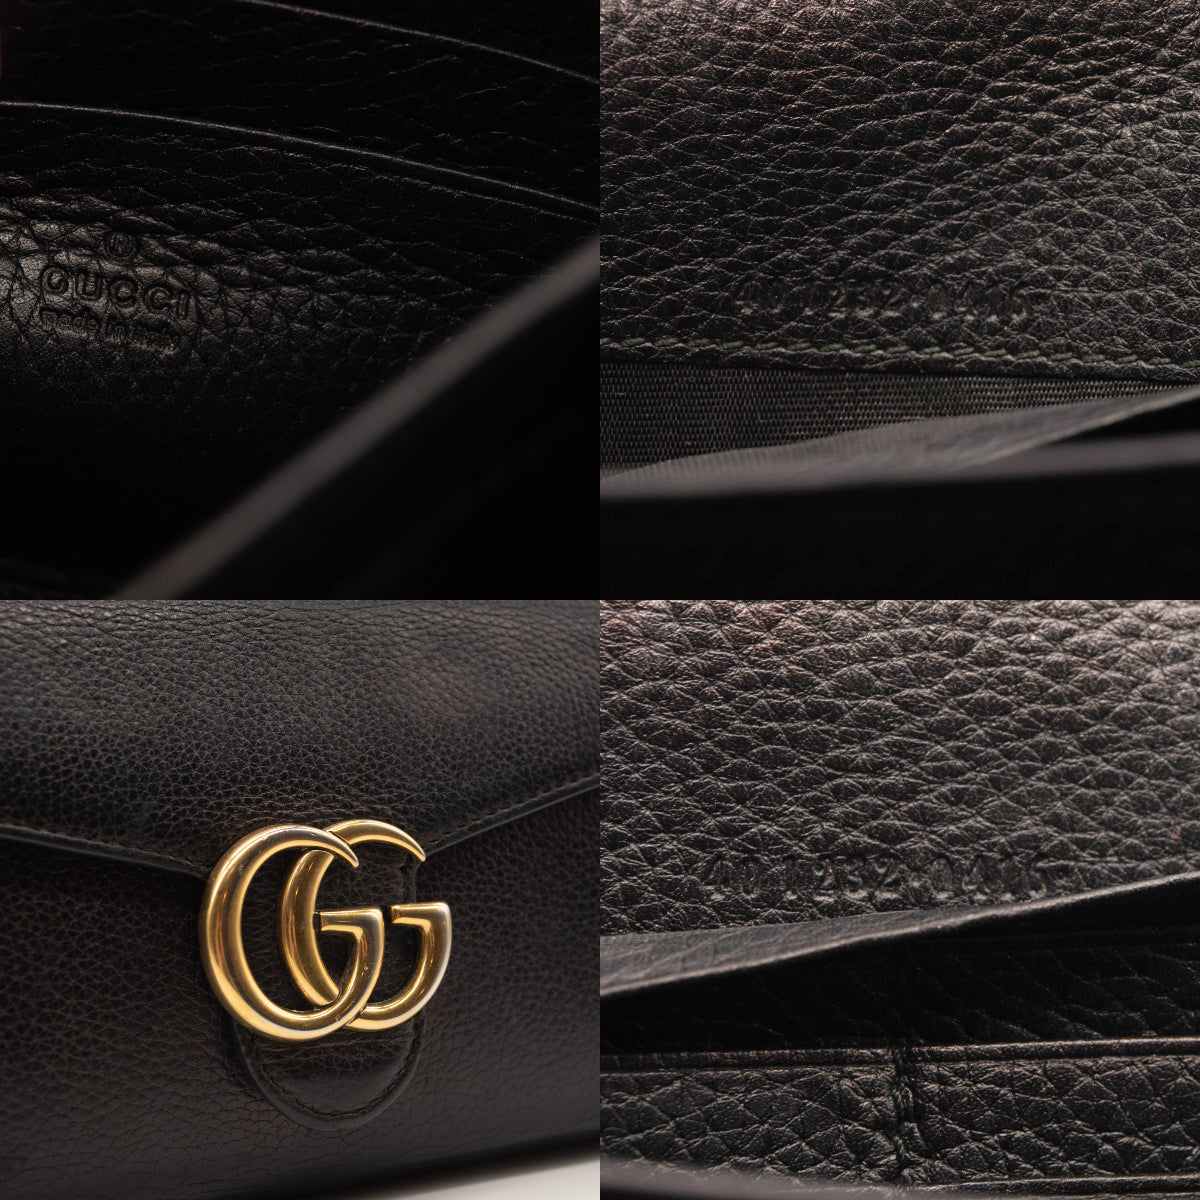 Gucci Marmont Chain Wallet Black Leather Shoulder Bag WOC GG Crossbody